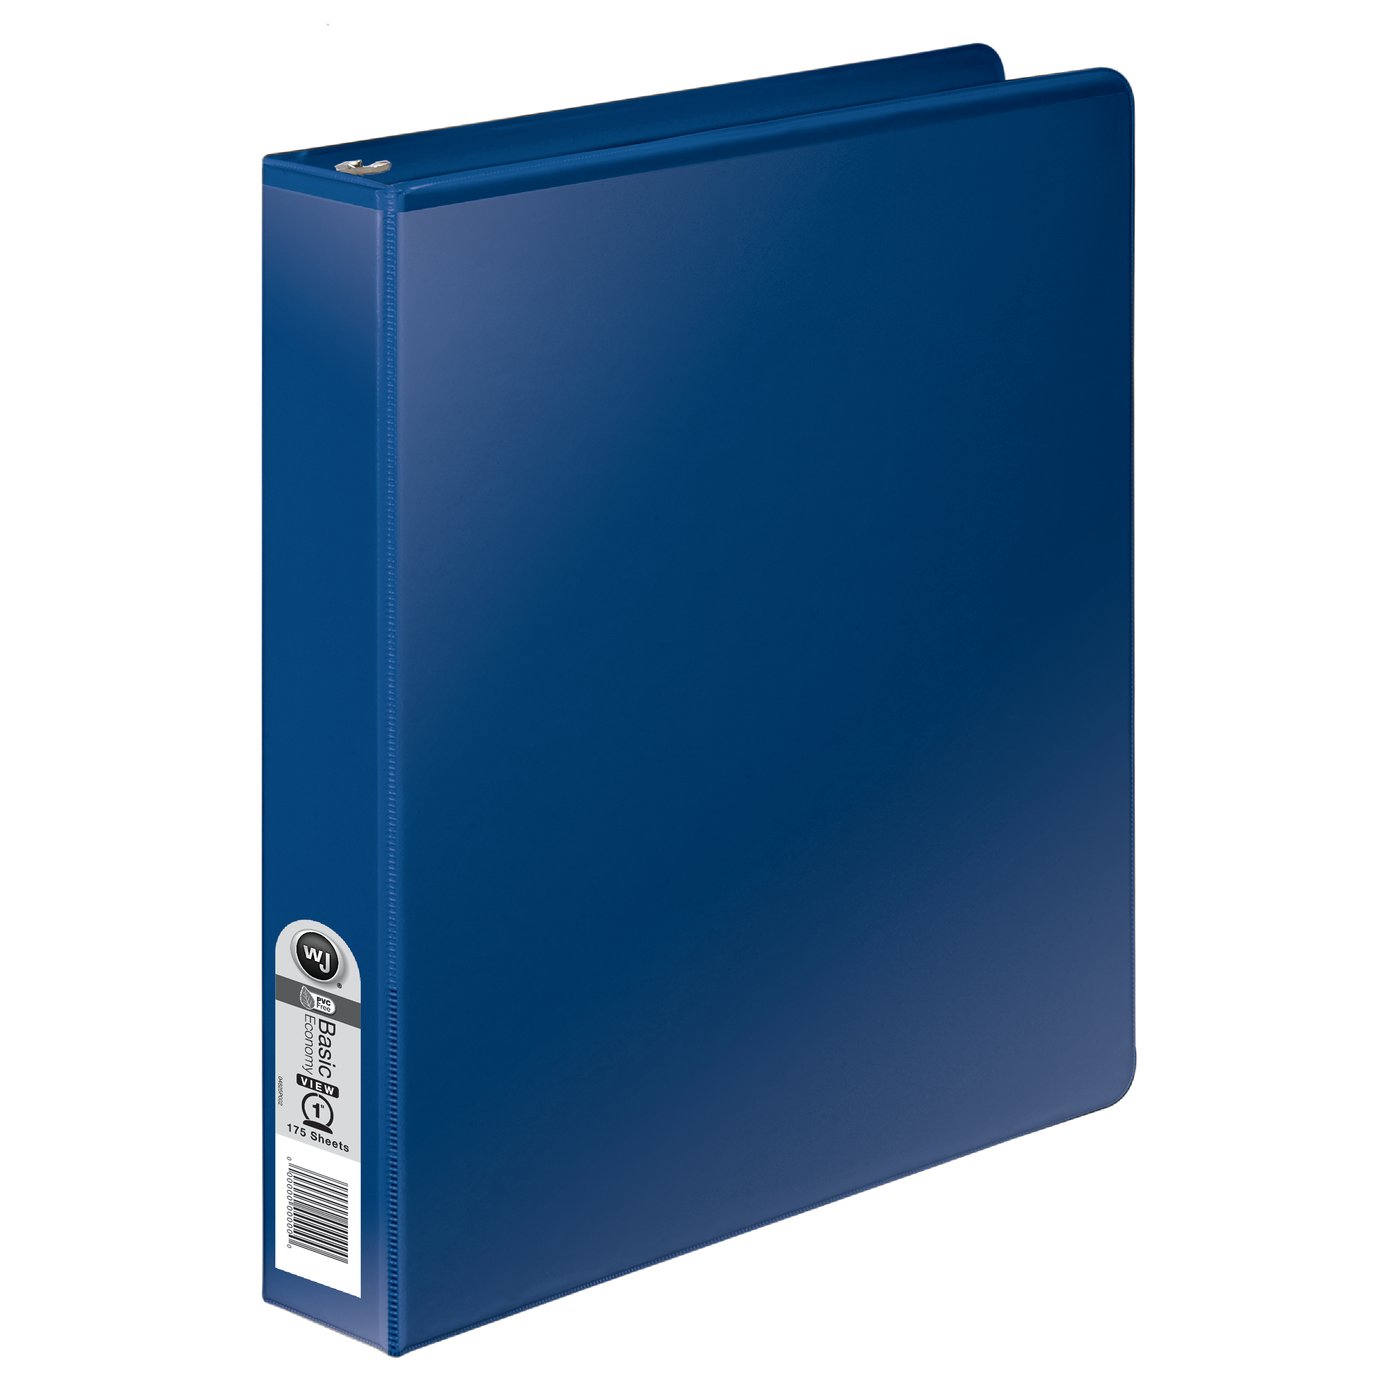 BLUE 1/2 INCH BINDER | Bahamas Office and School Supplies
